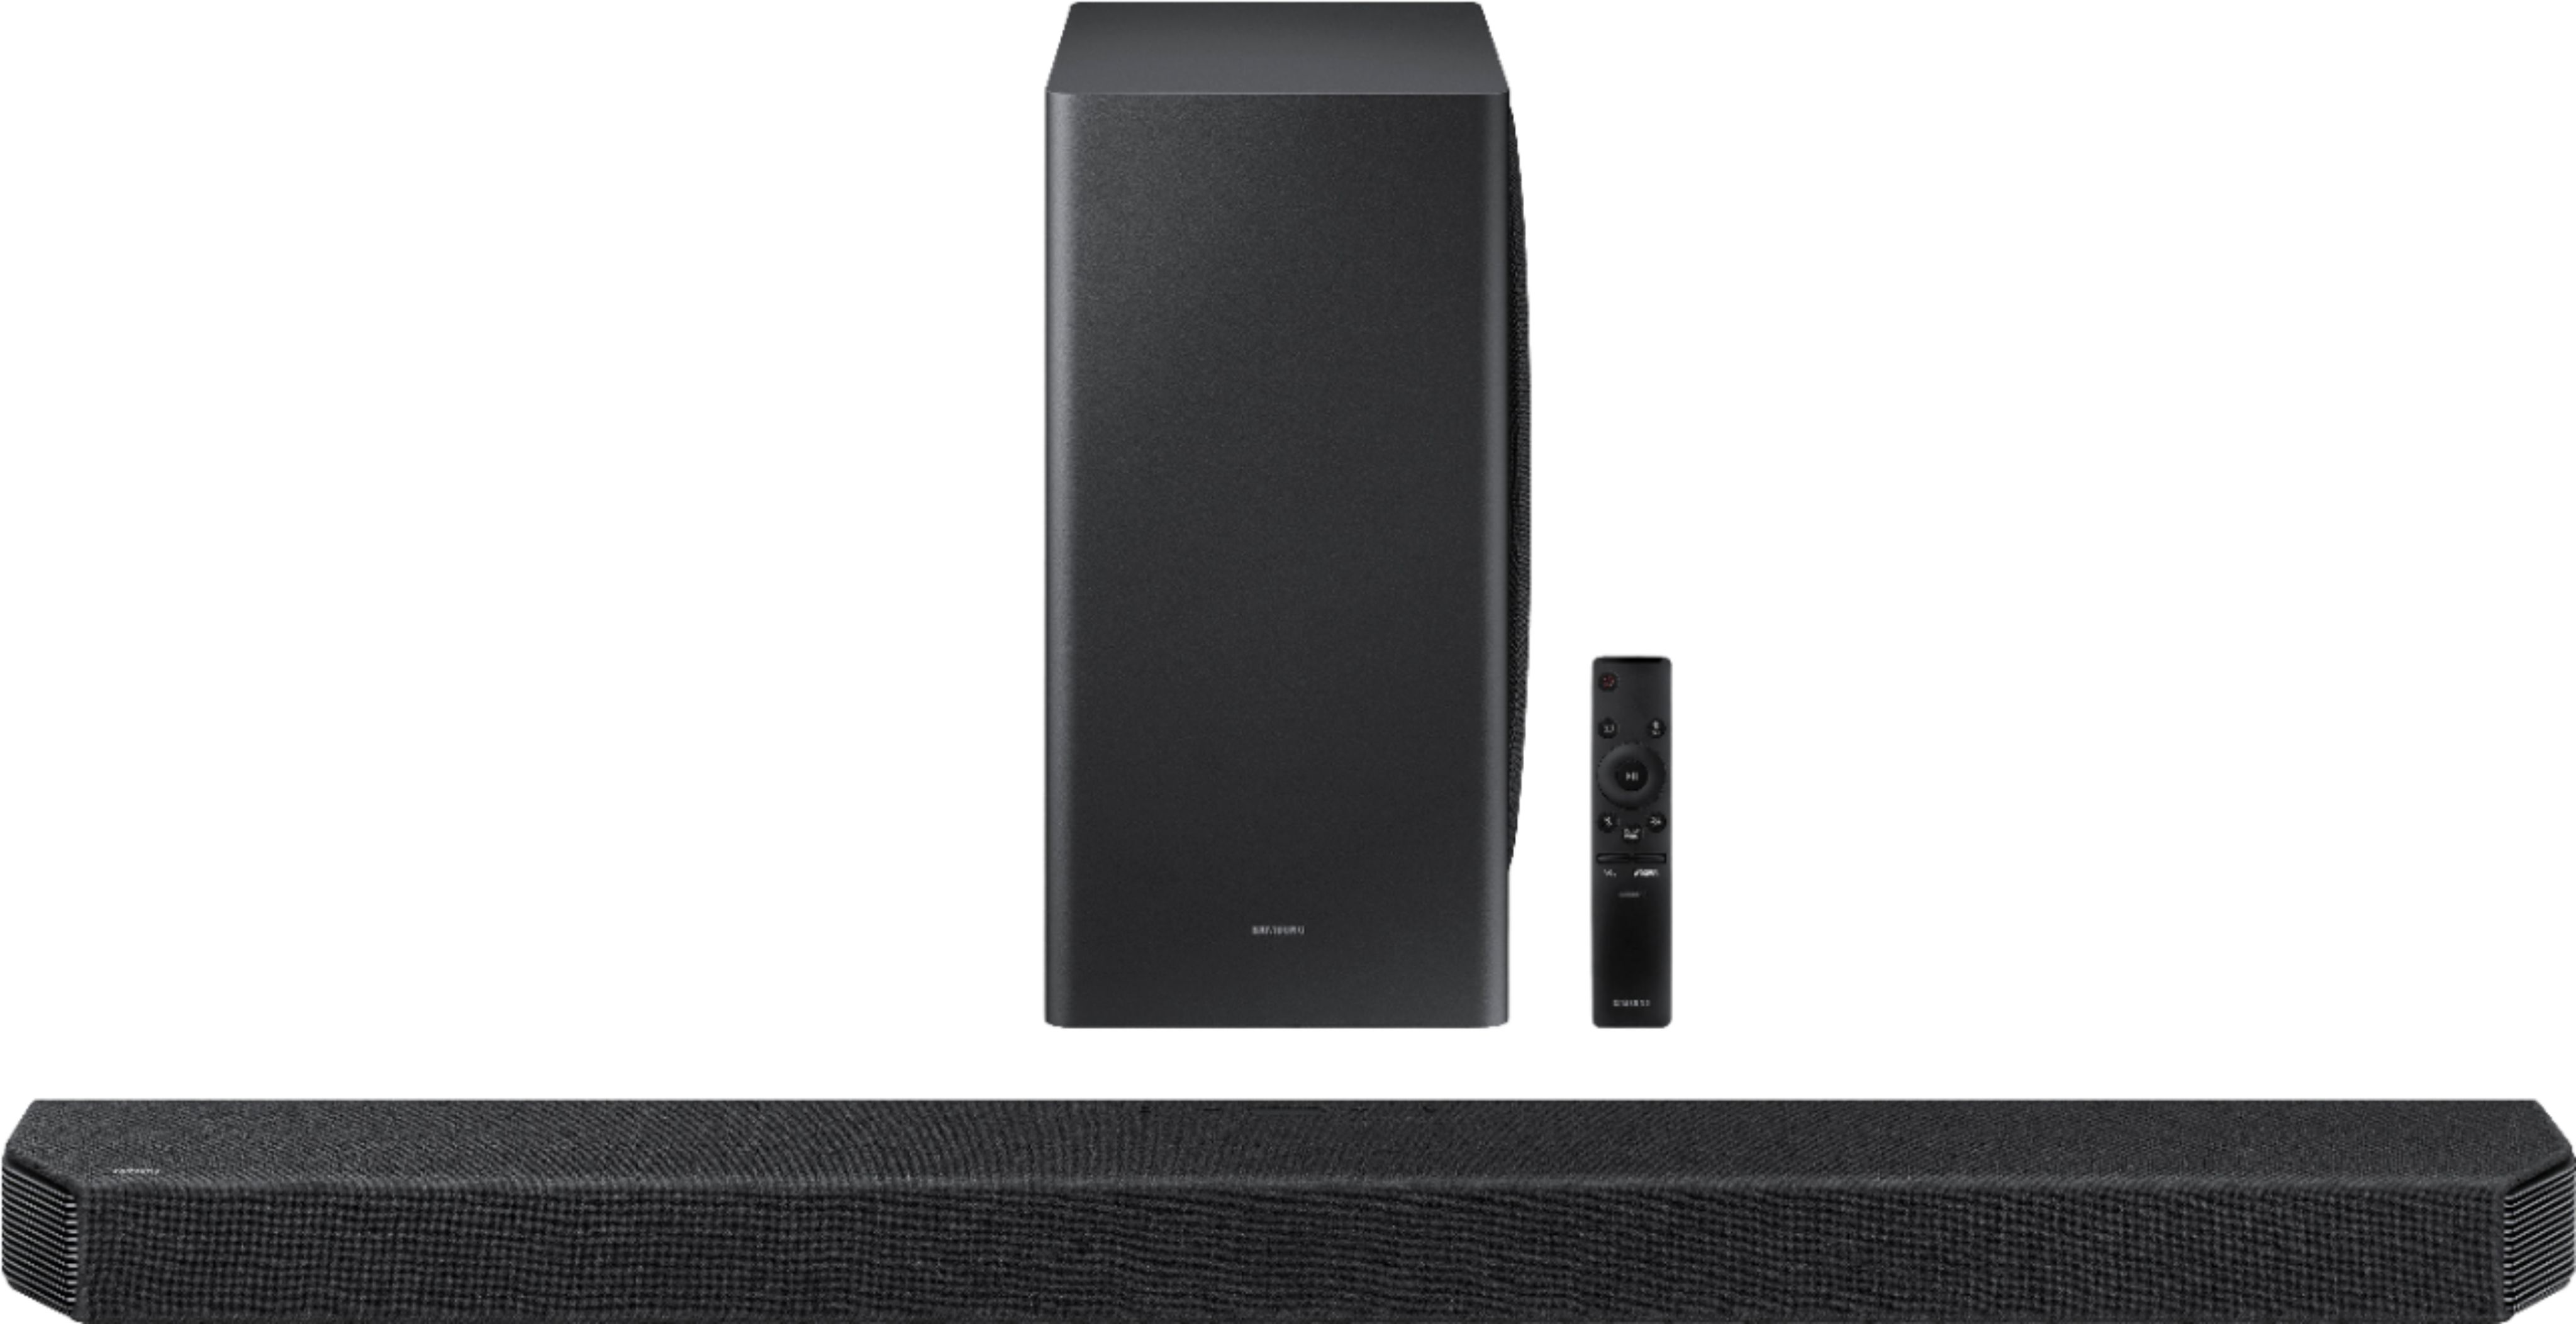 7.1 Channel Home Theater Systems for sale